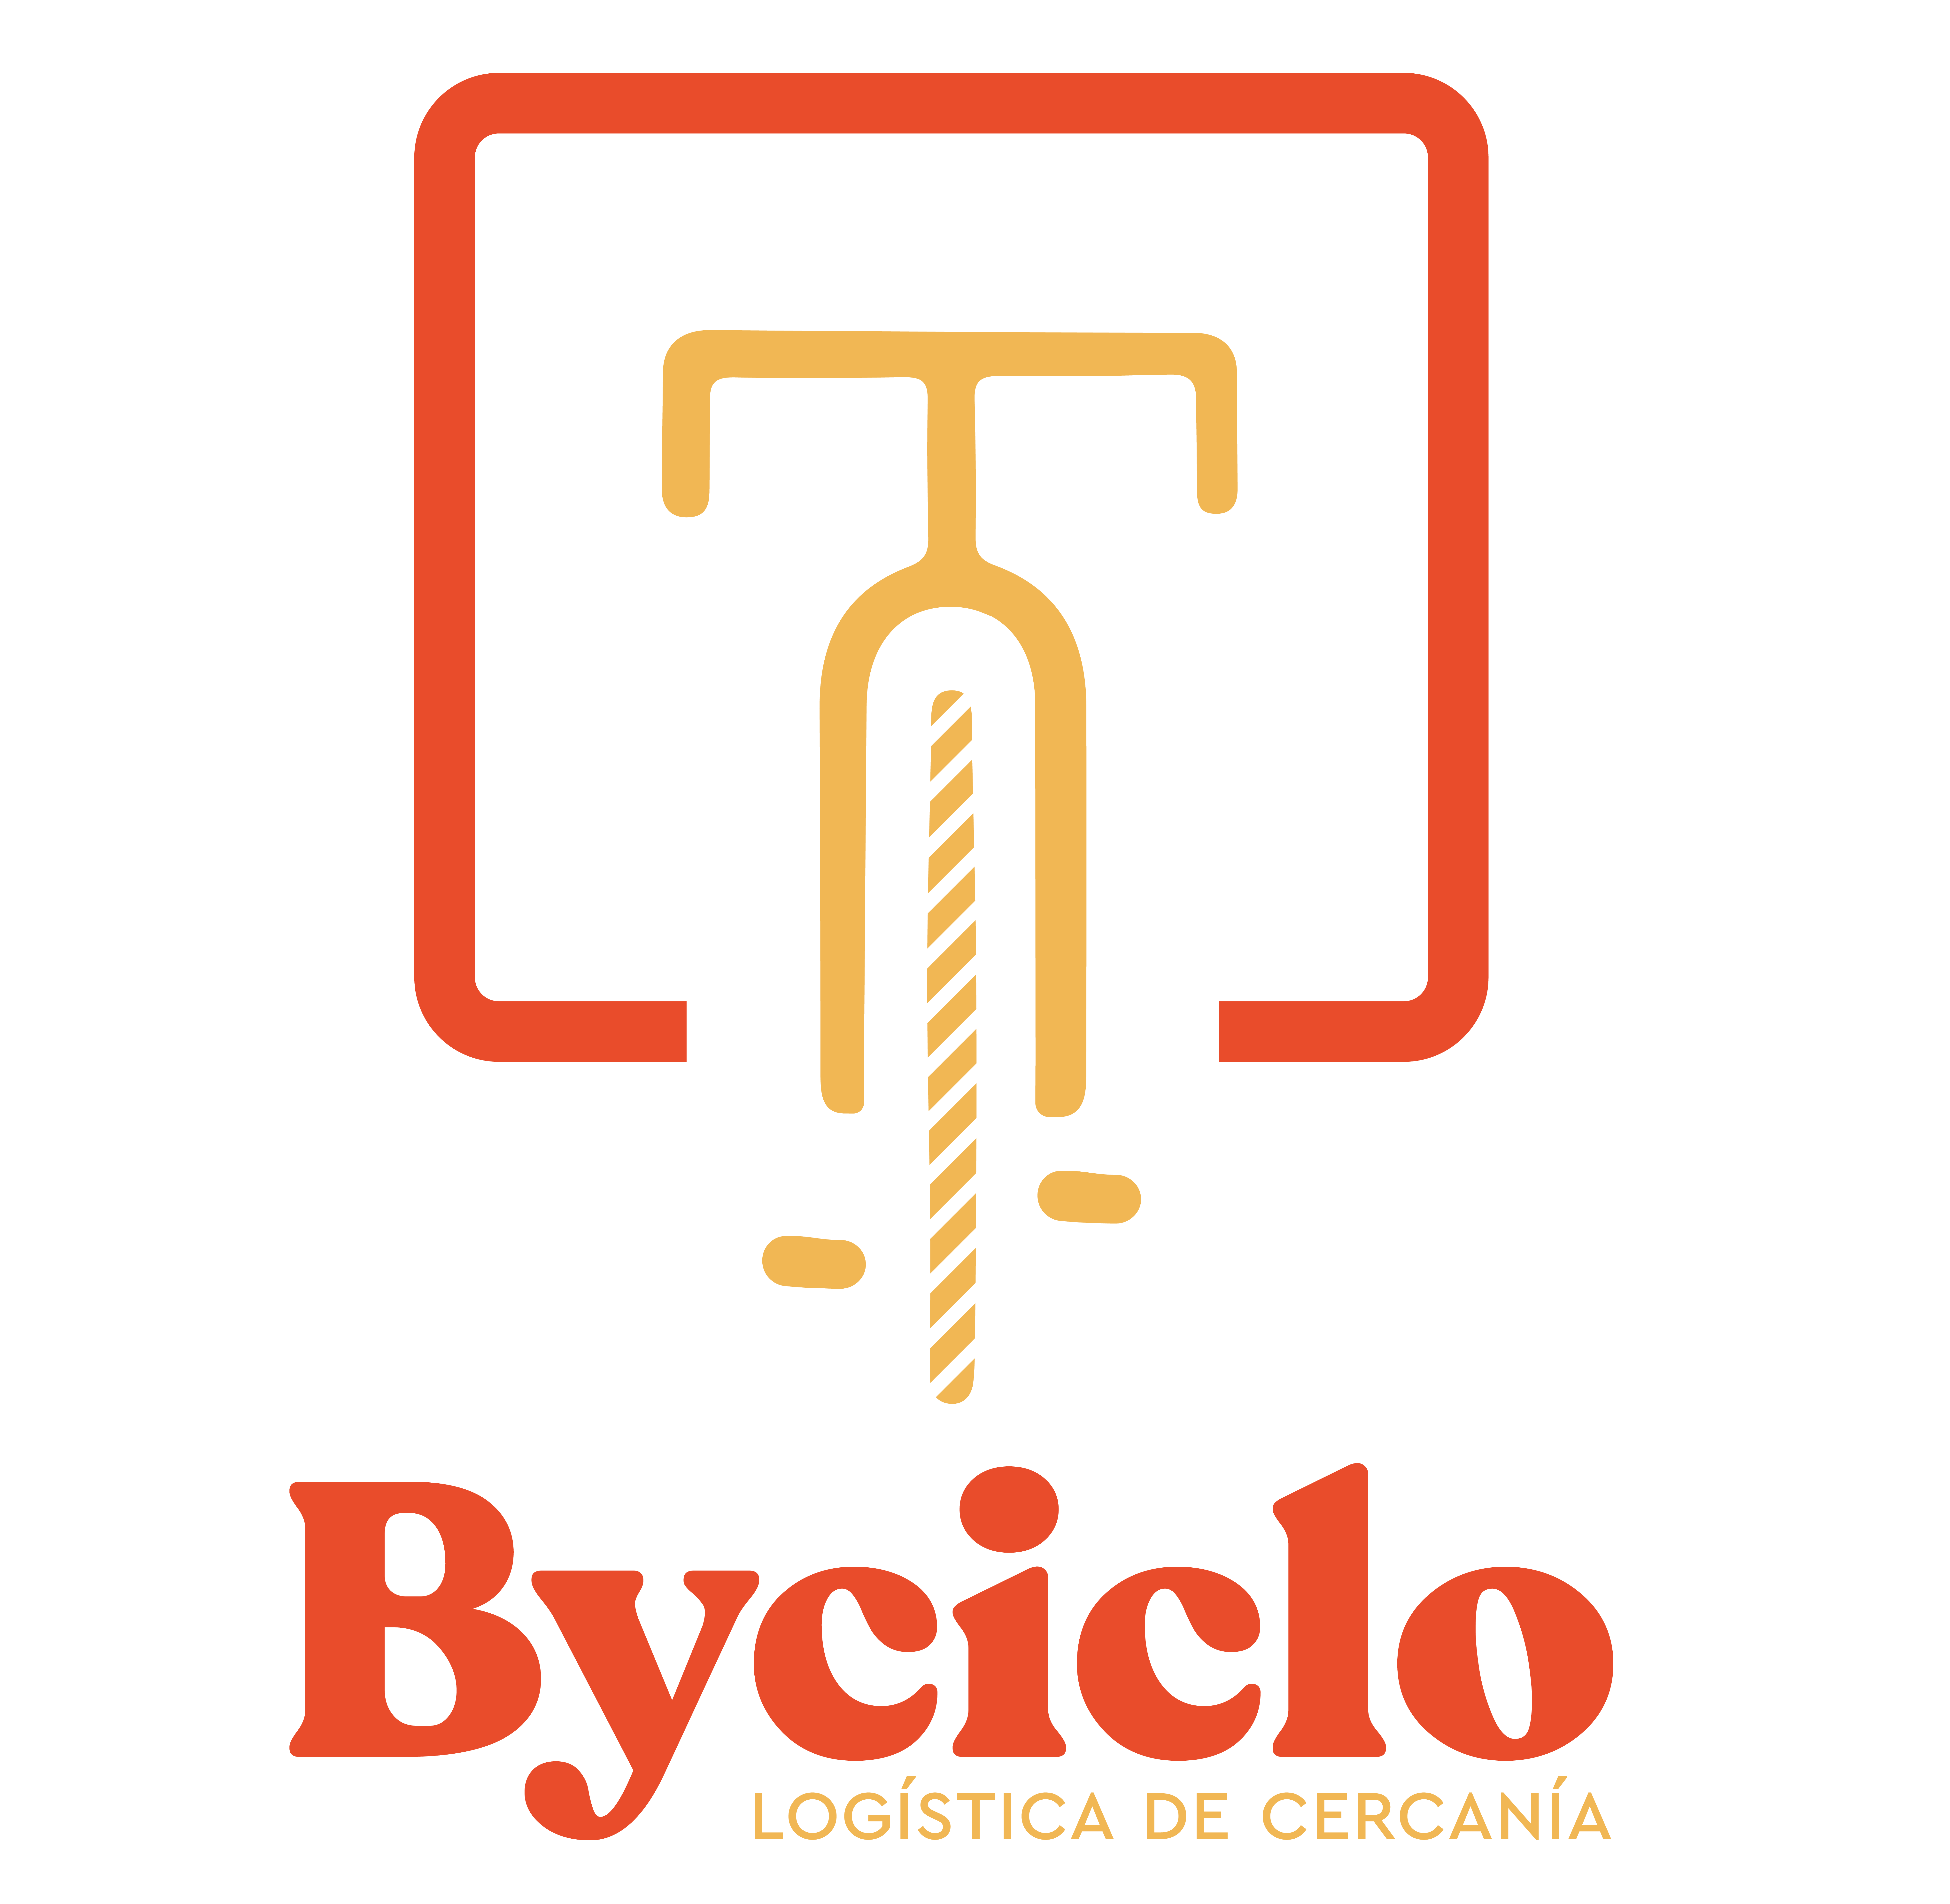 Byciclo